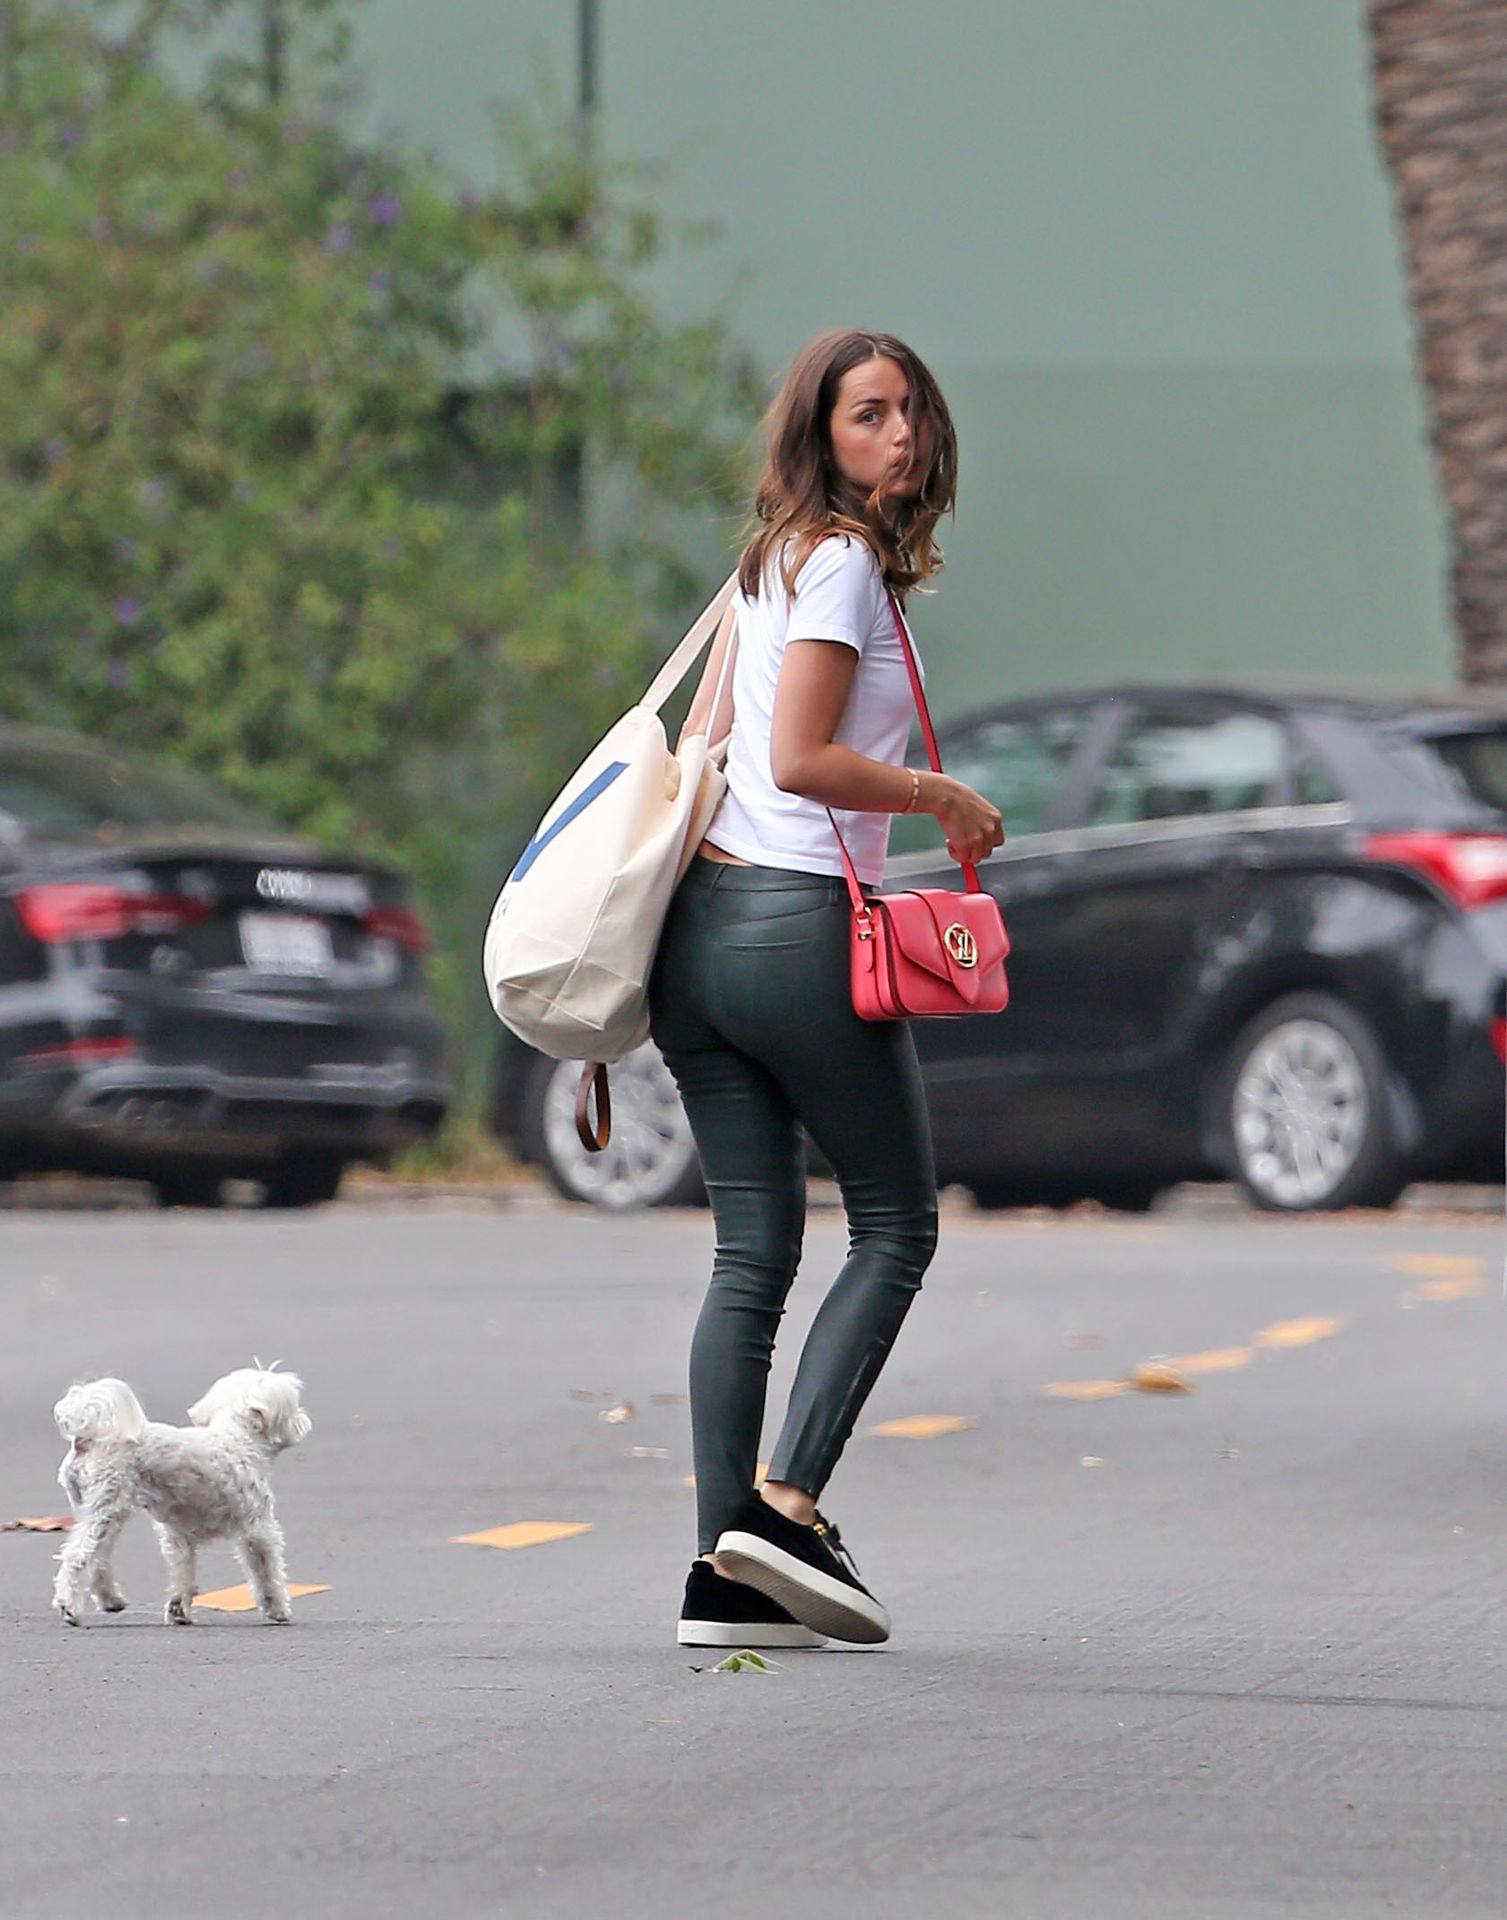 Ana De Armas – Sexy Ass In Leather Pants Out In Los Angeles 0006